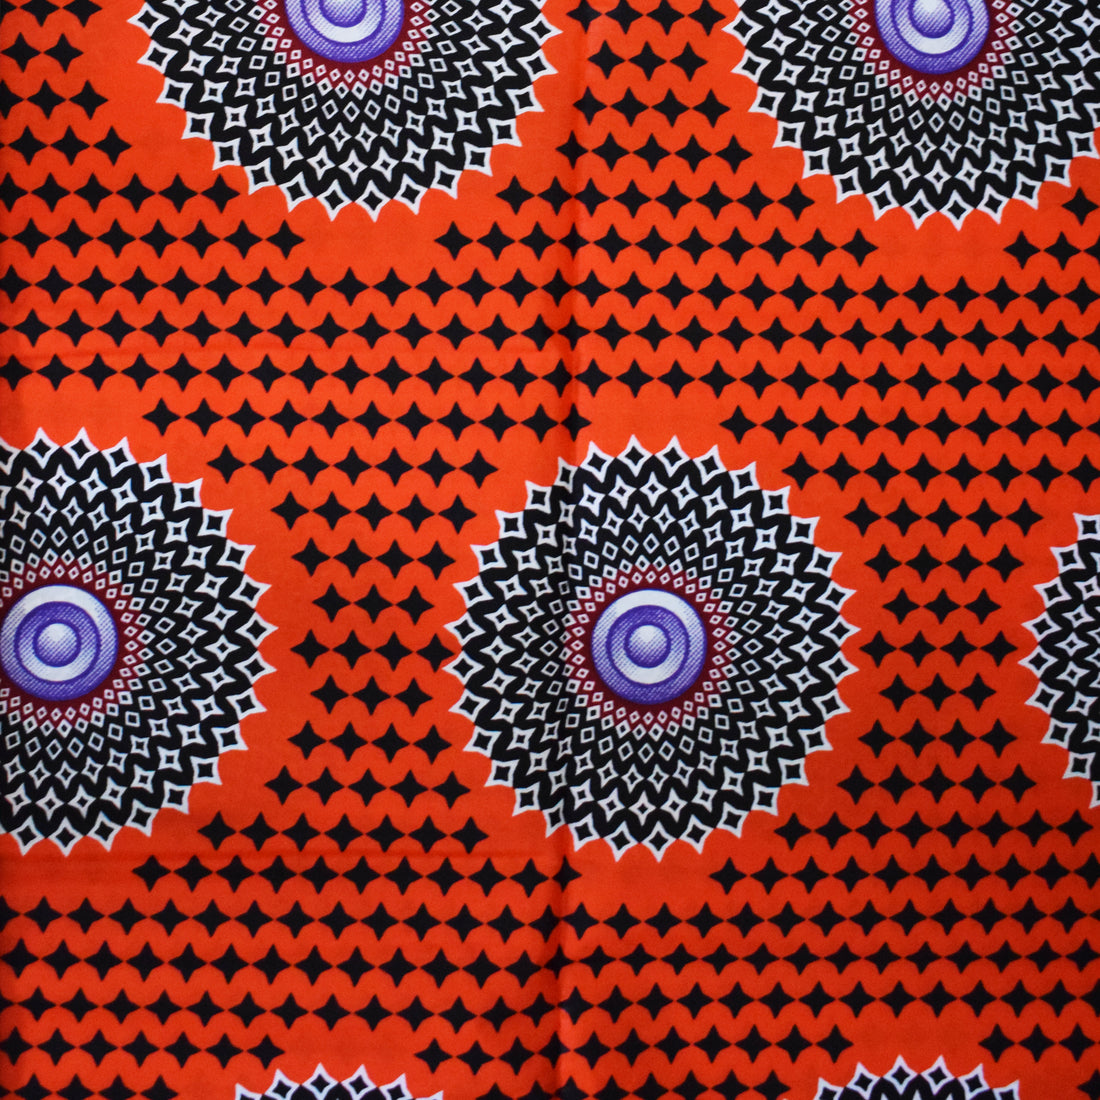 African motifs and symbols are wax printed onto cotton.